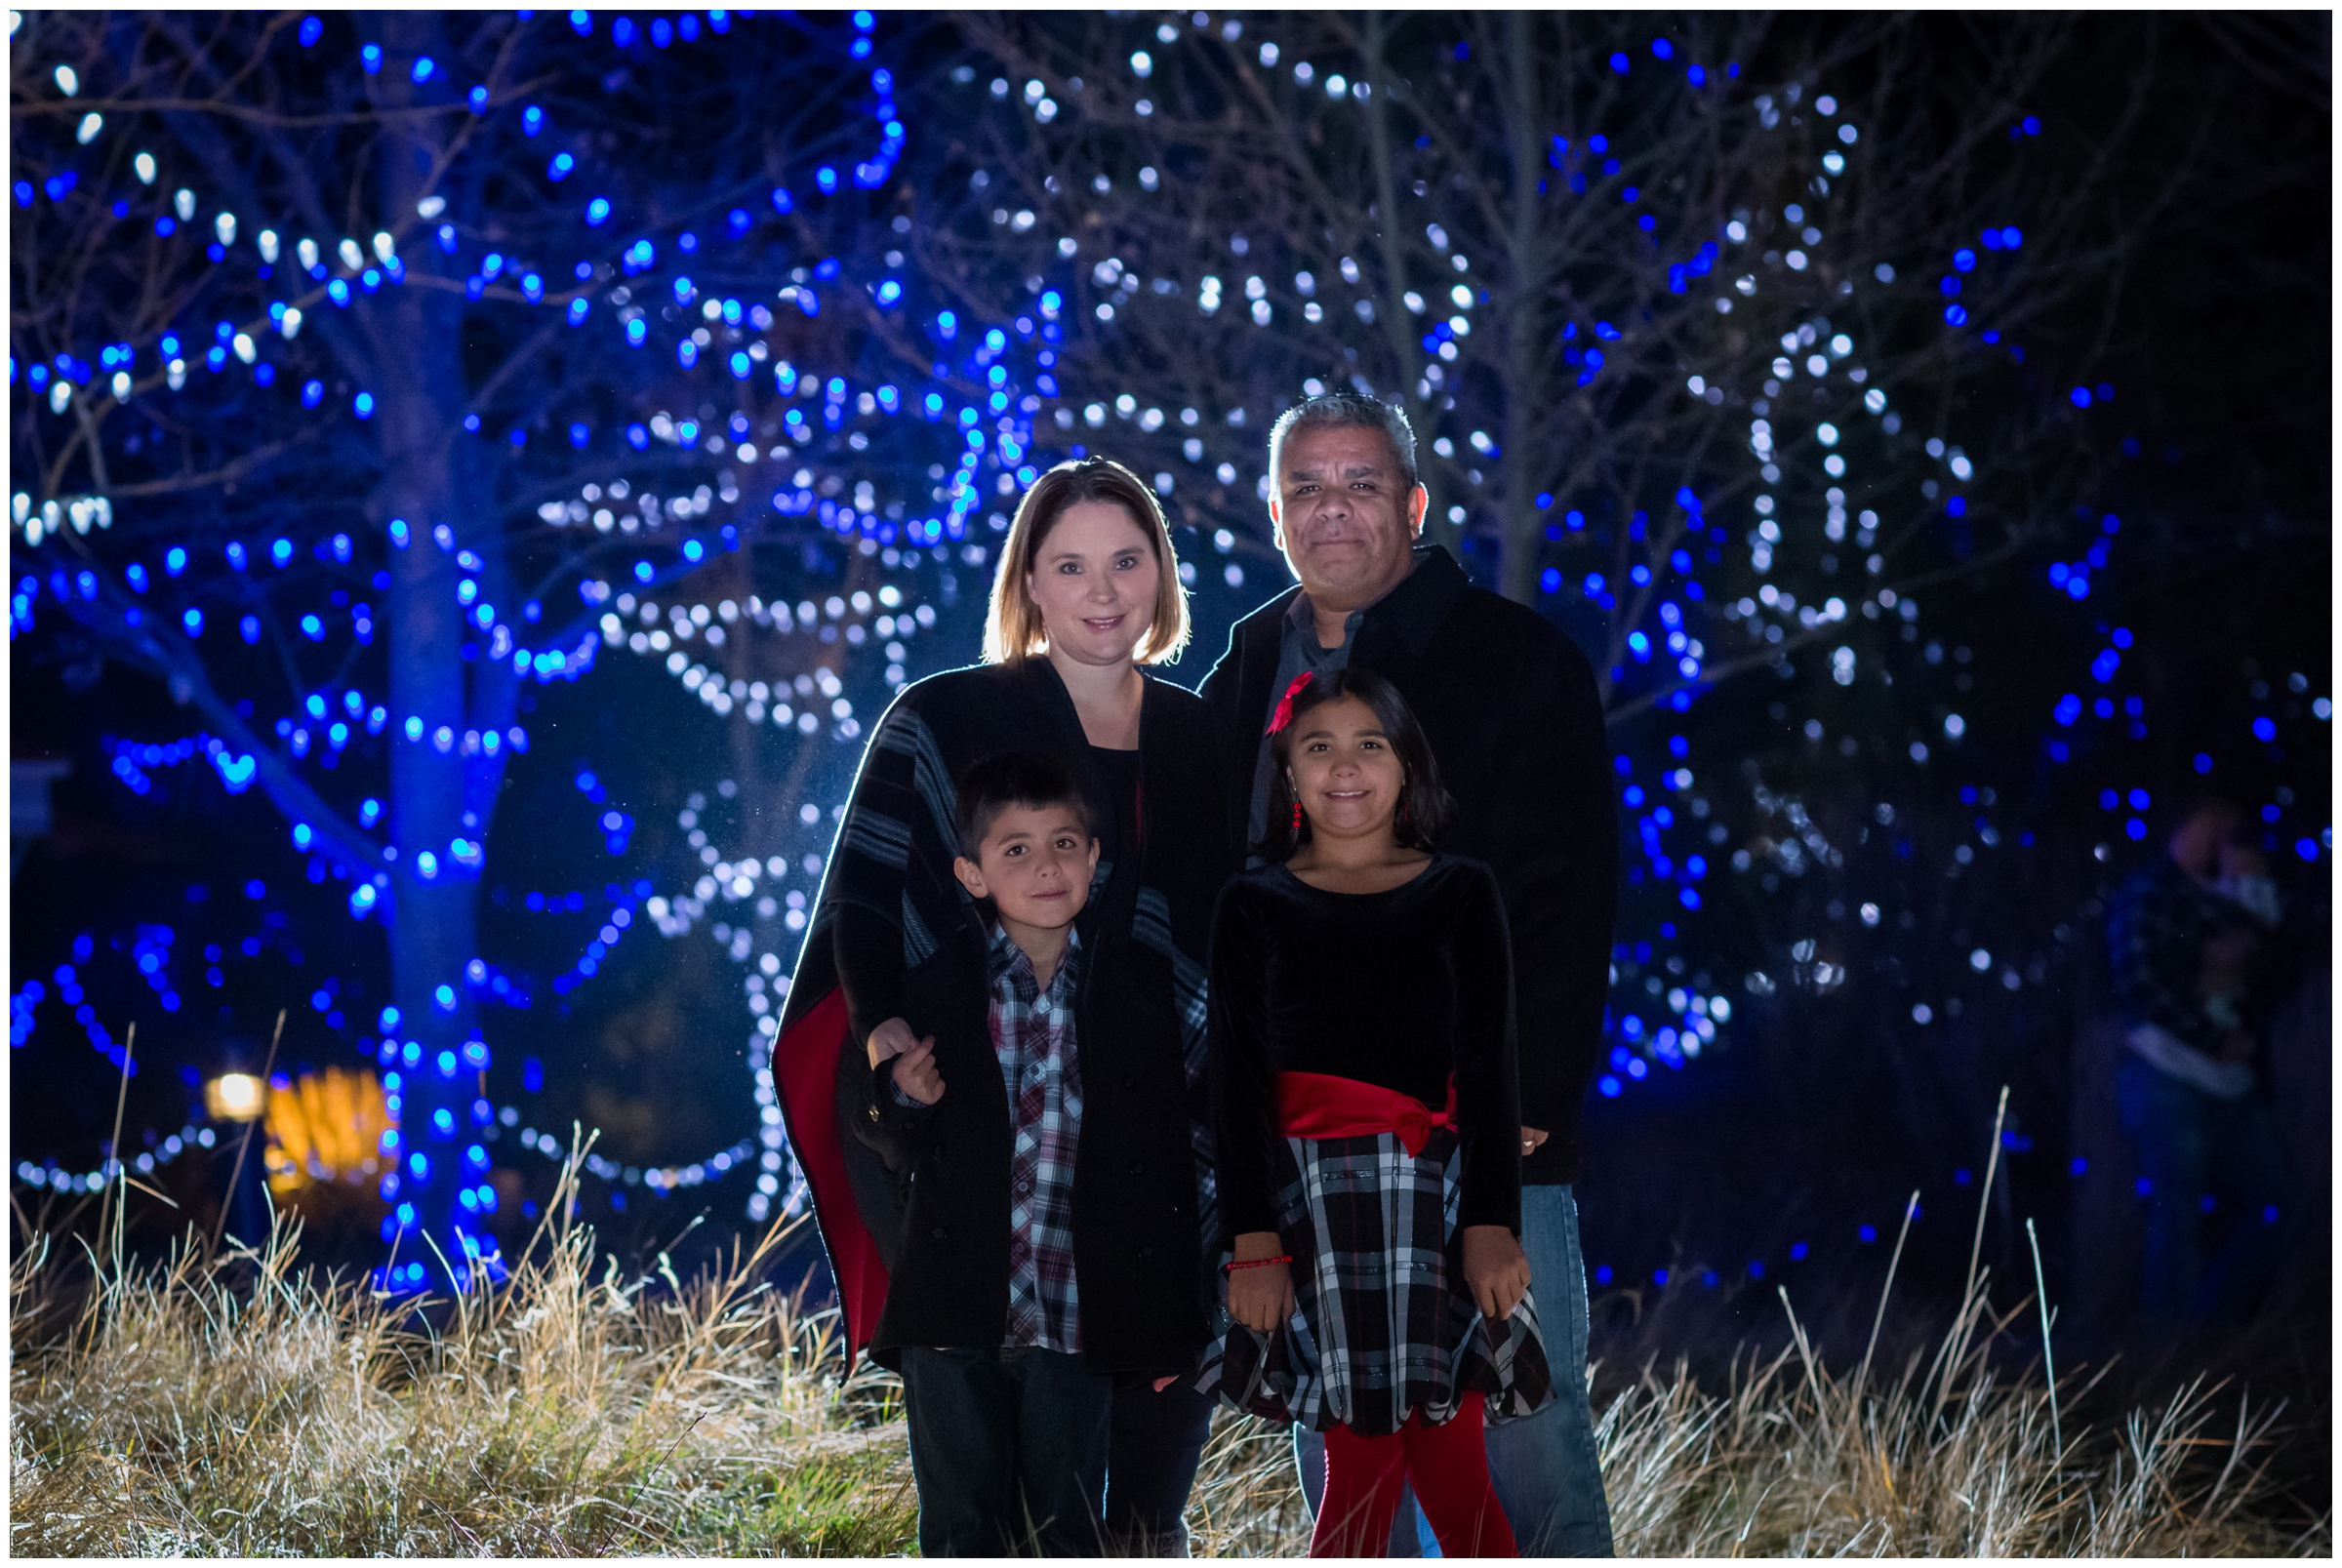 winter Colorado family portraits at night with blue holiday lights 